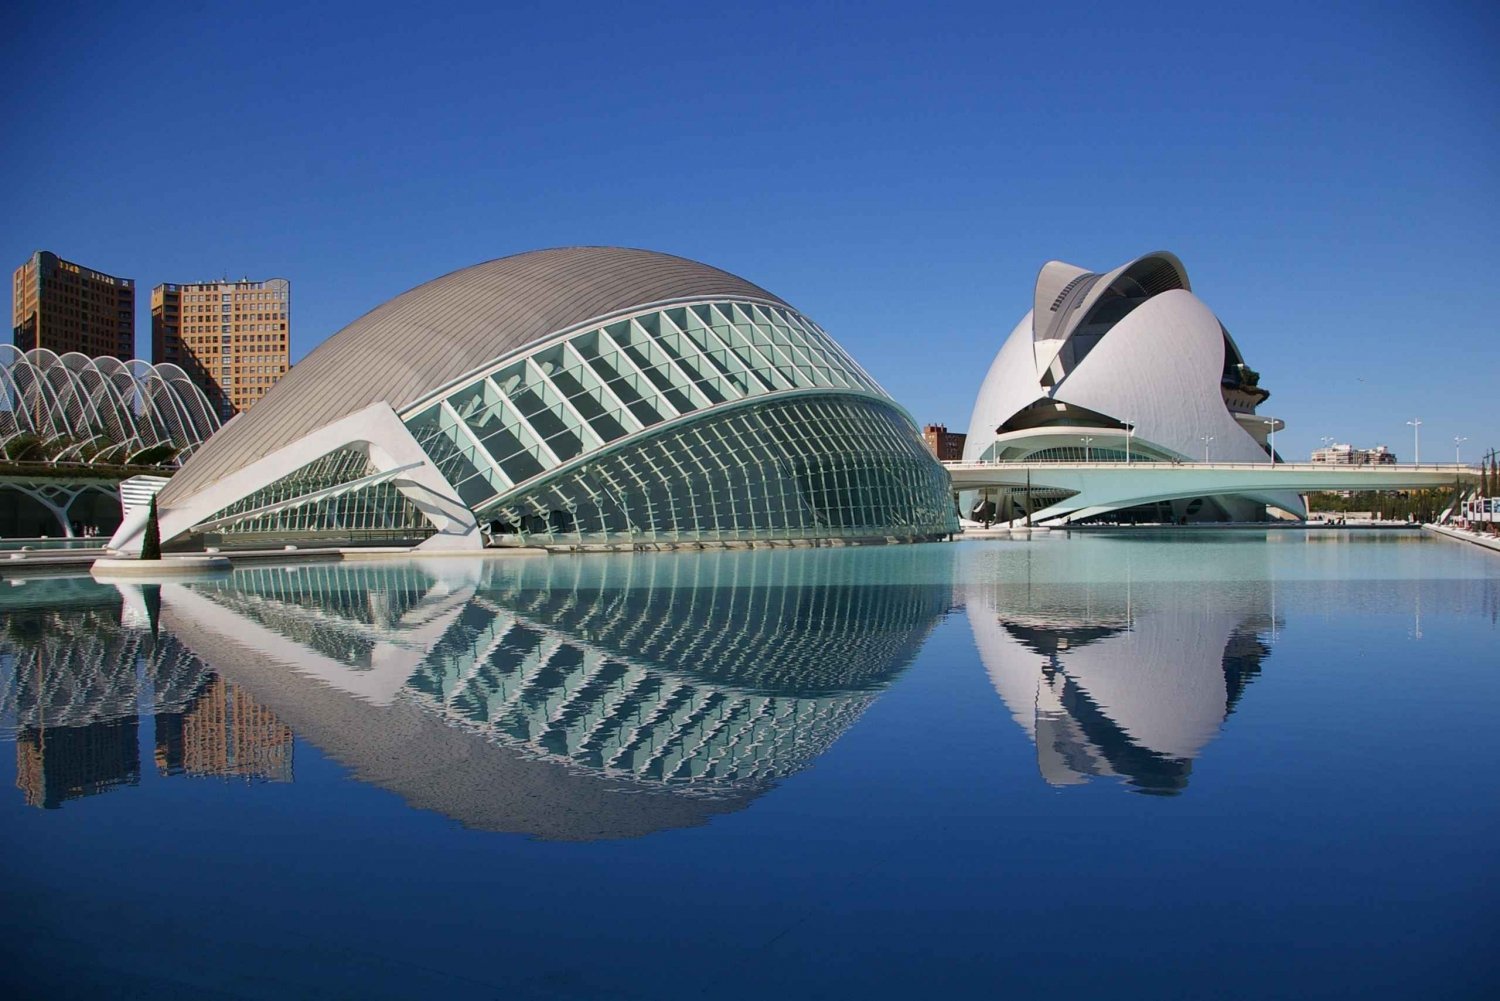 From Alicante: Valencia Full-Day Guided Tour